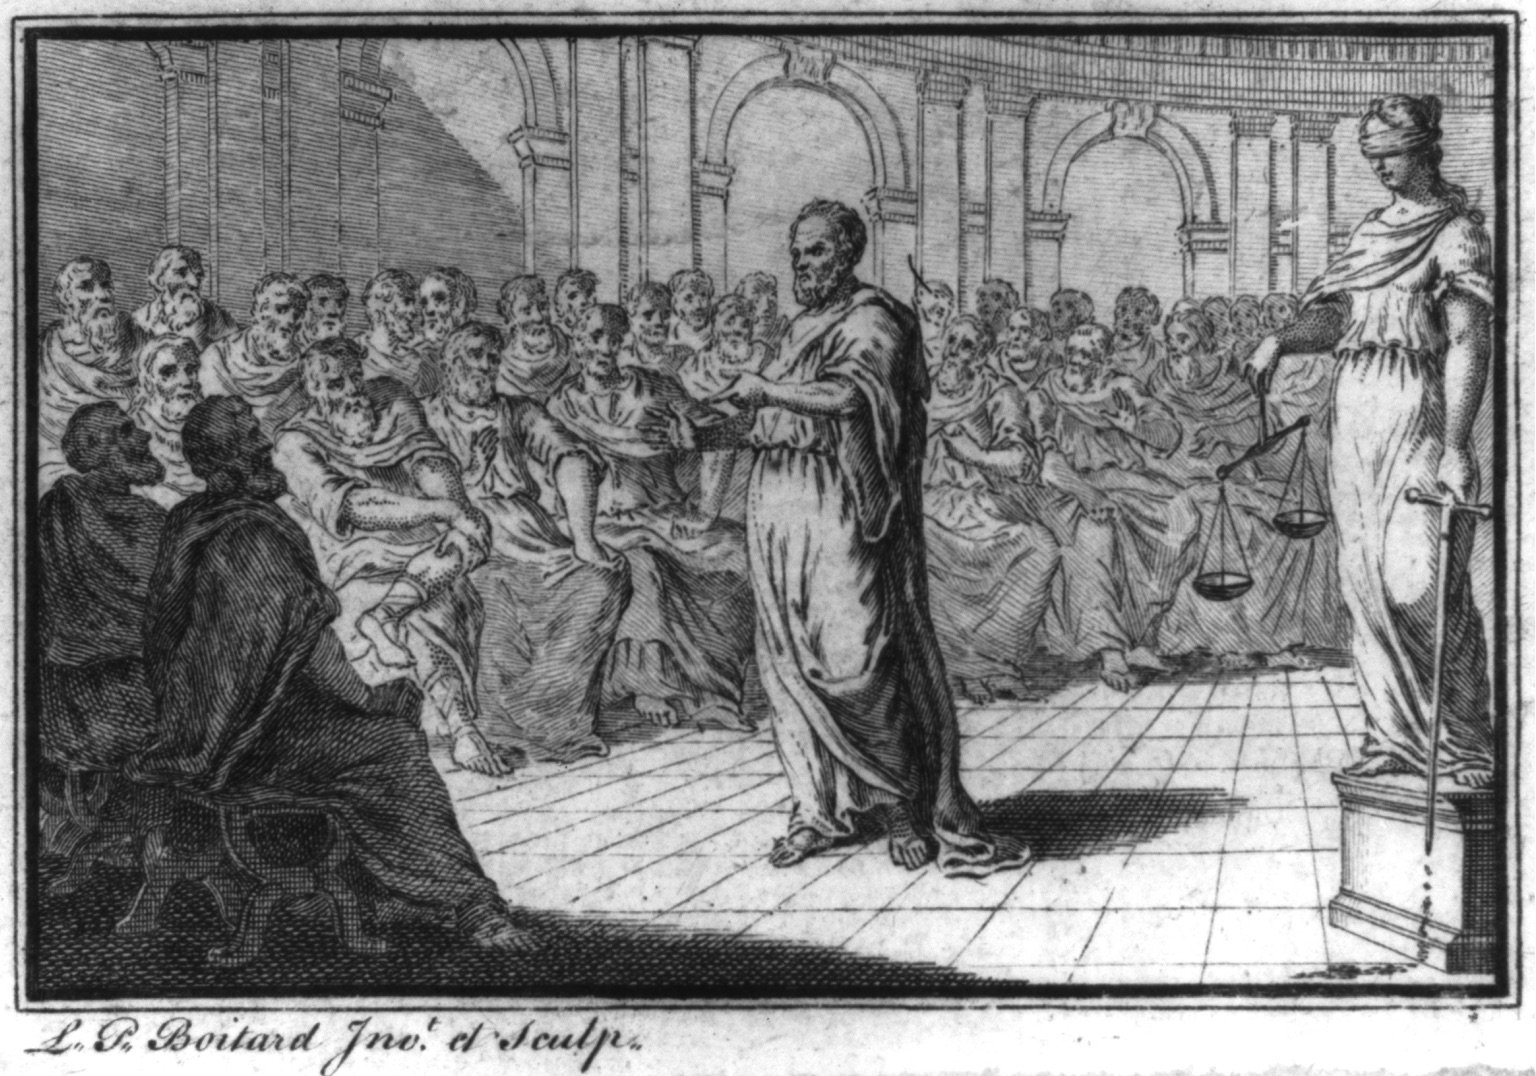 Socrates on trial in an 18th-century engraving by Louis Peter Boitard